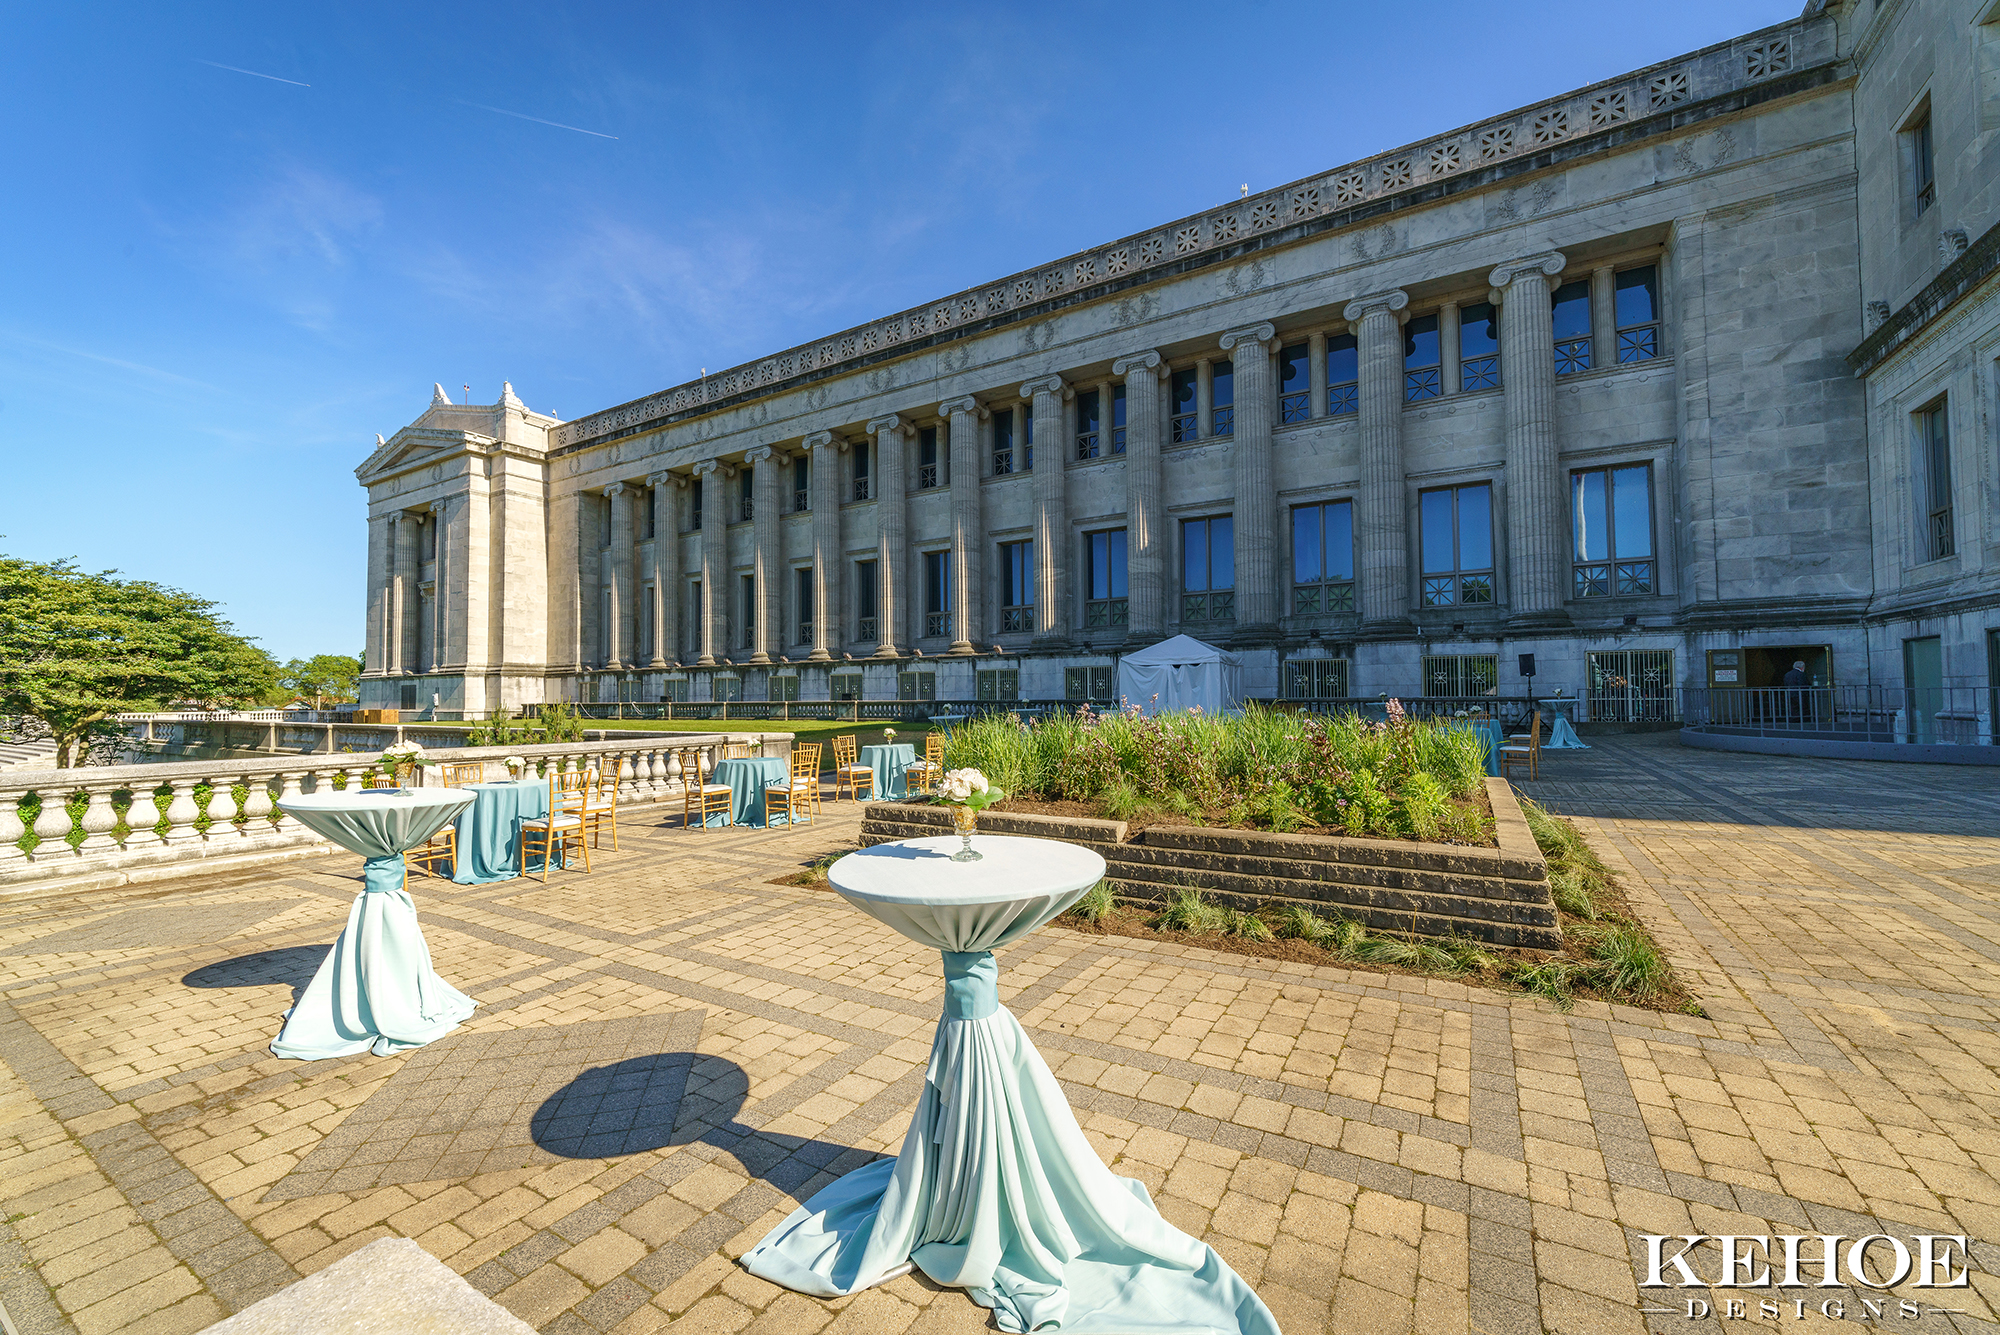 Cocktail tables arranged on the Field Museum’s northeast terrace on a sunny day.